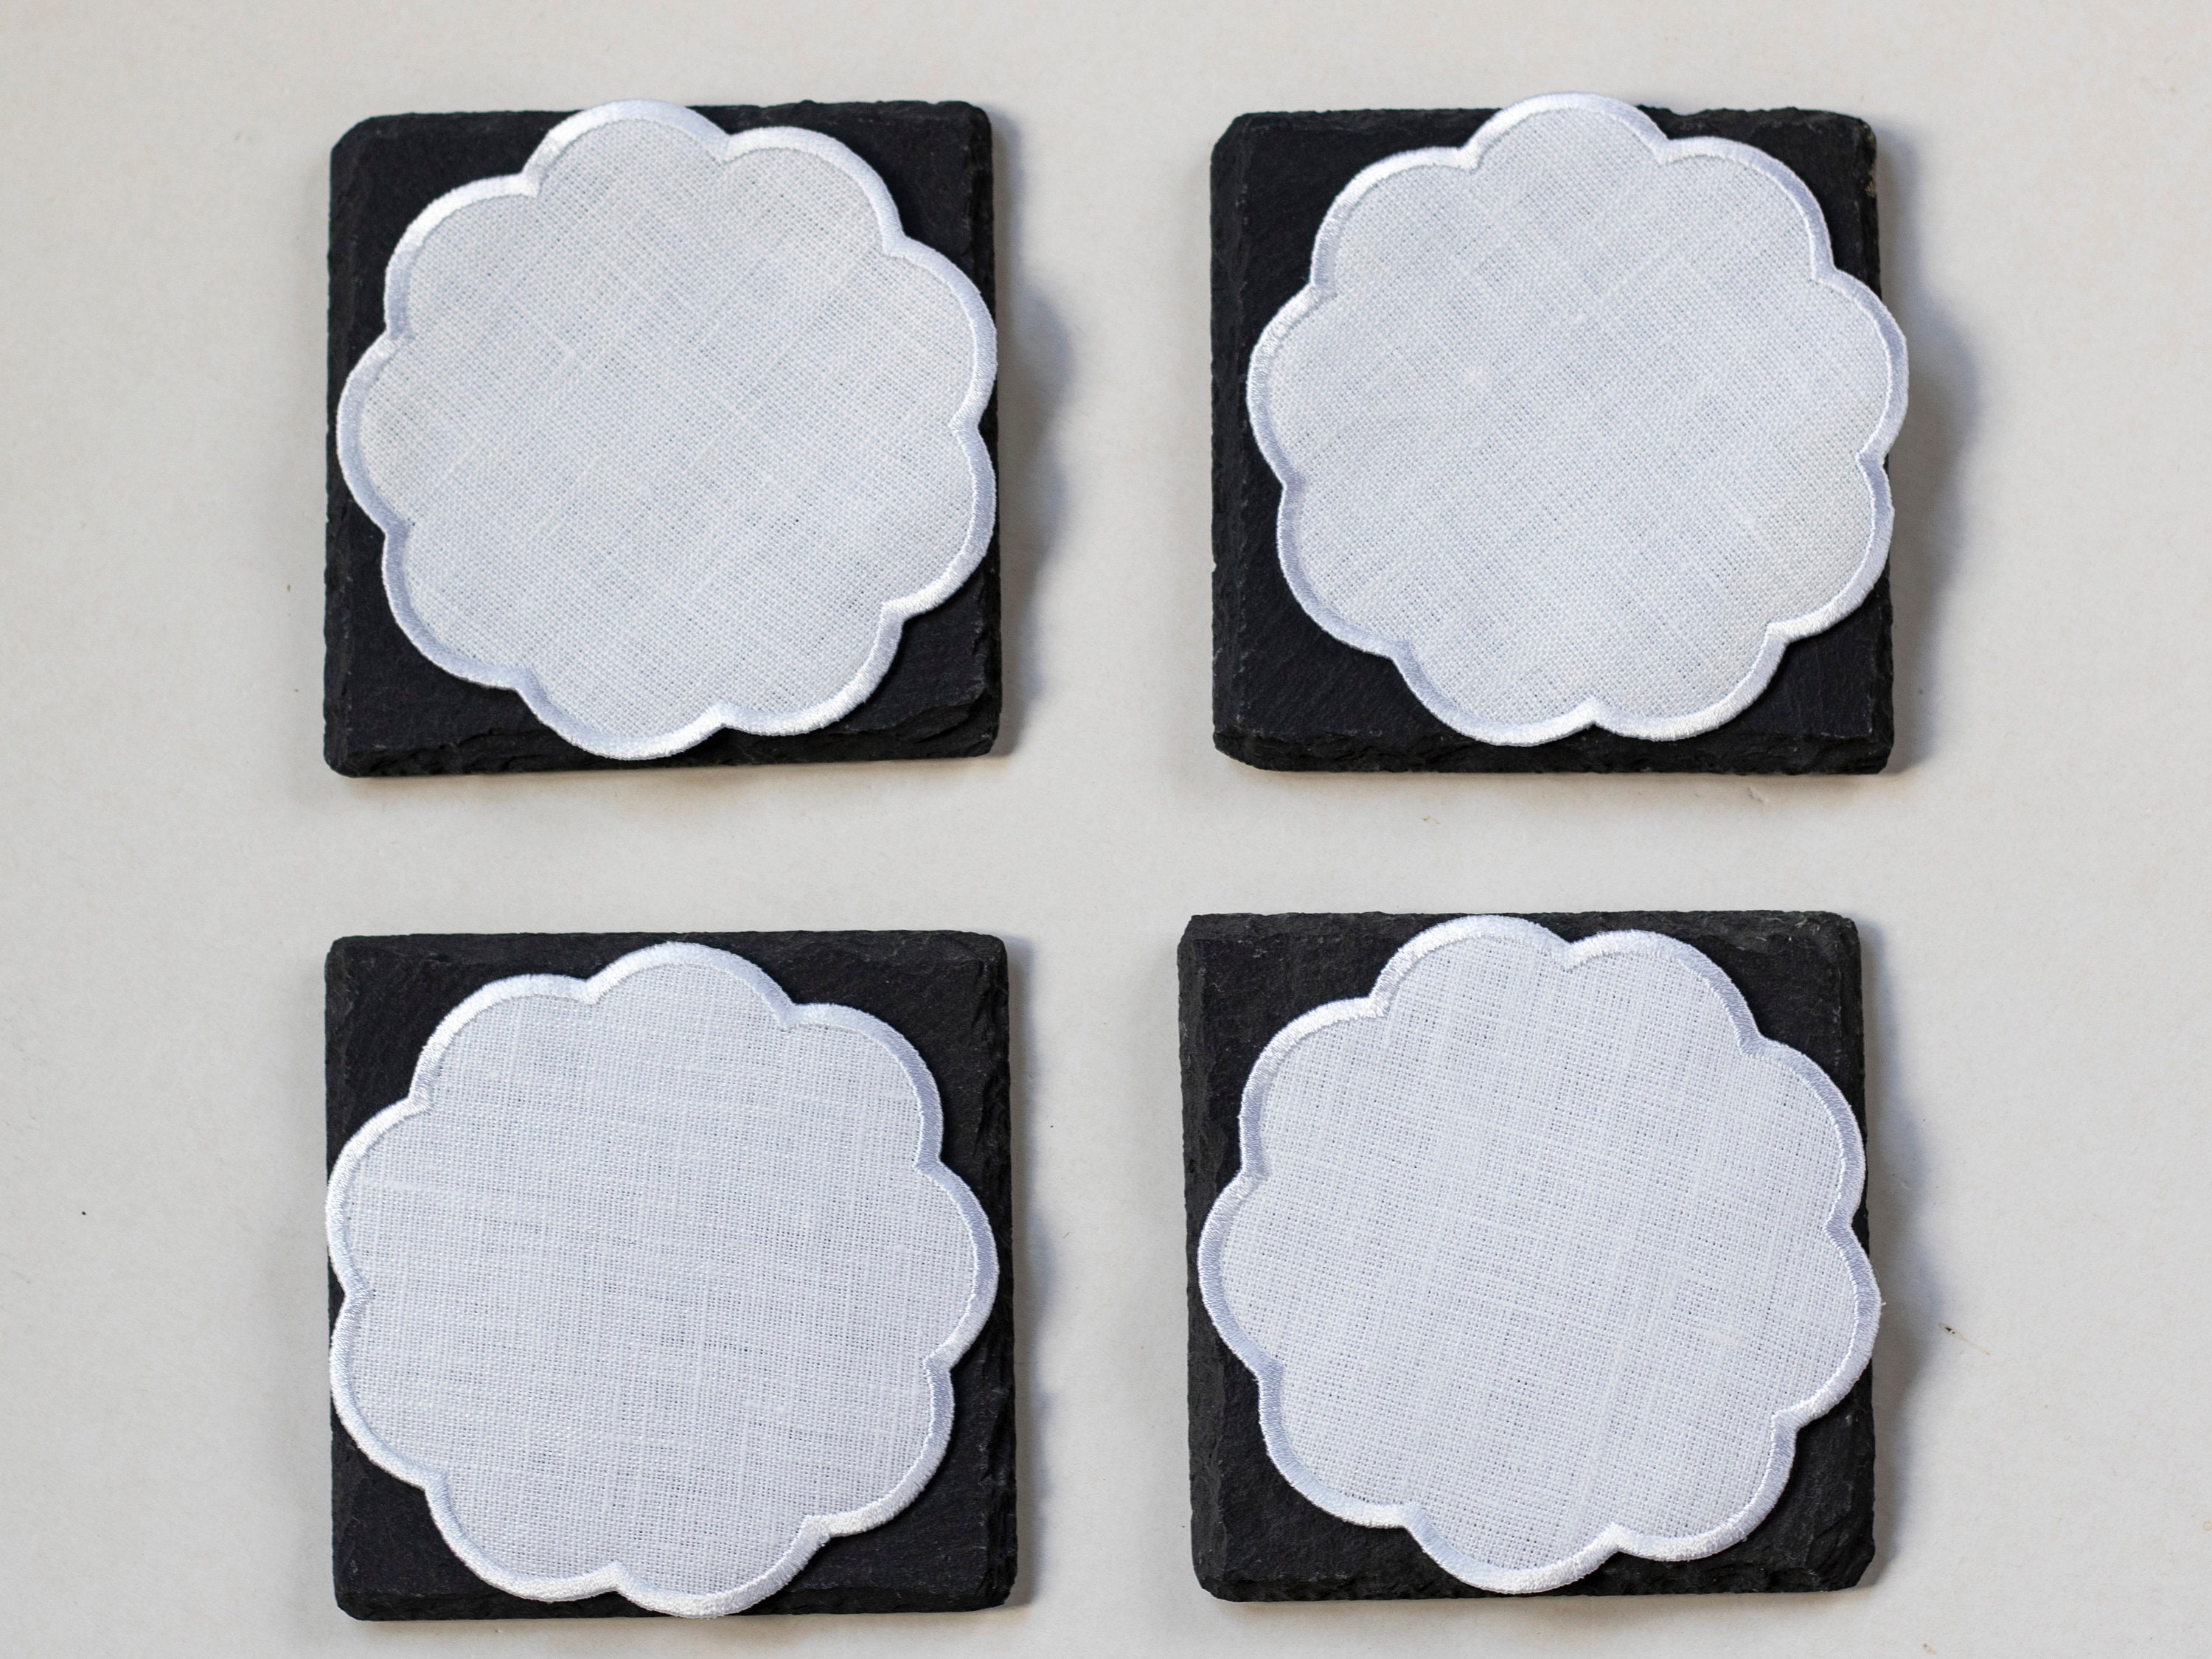 3.25 in Linen-Like Scalloped White Coasters With Wax Backing 1000 ct.